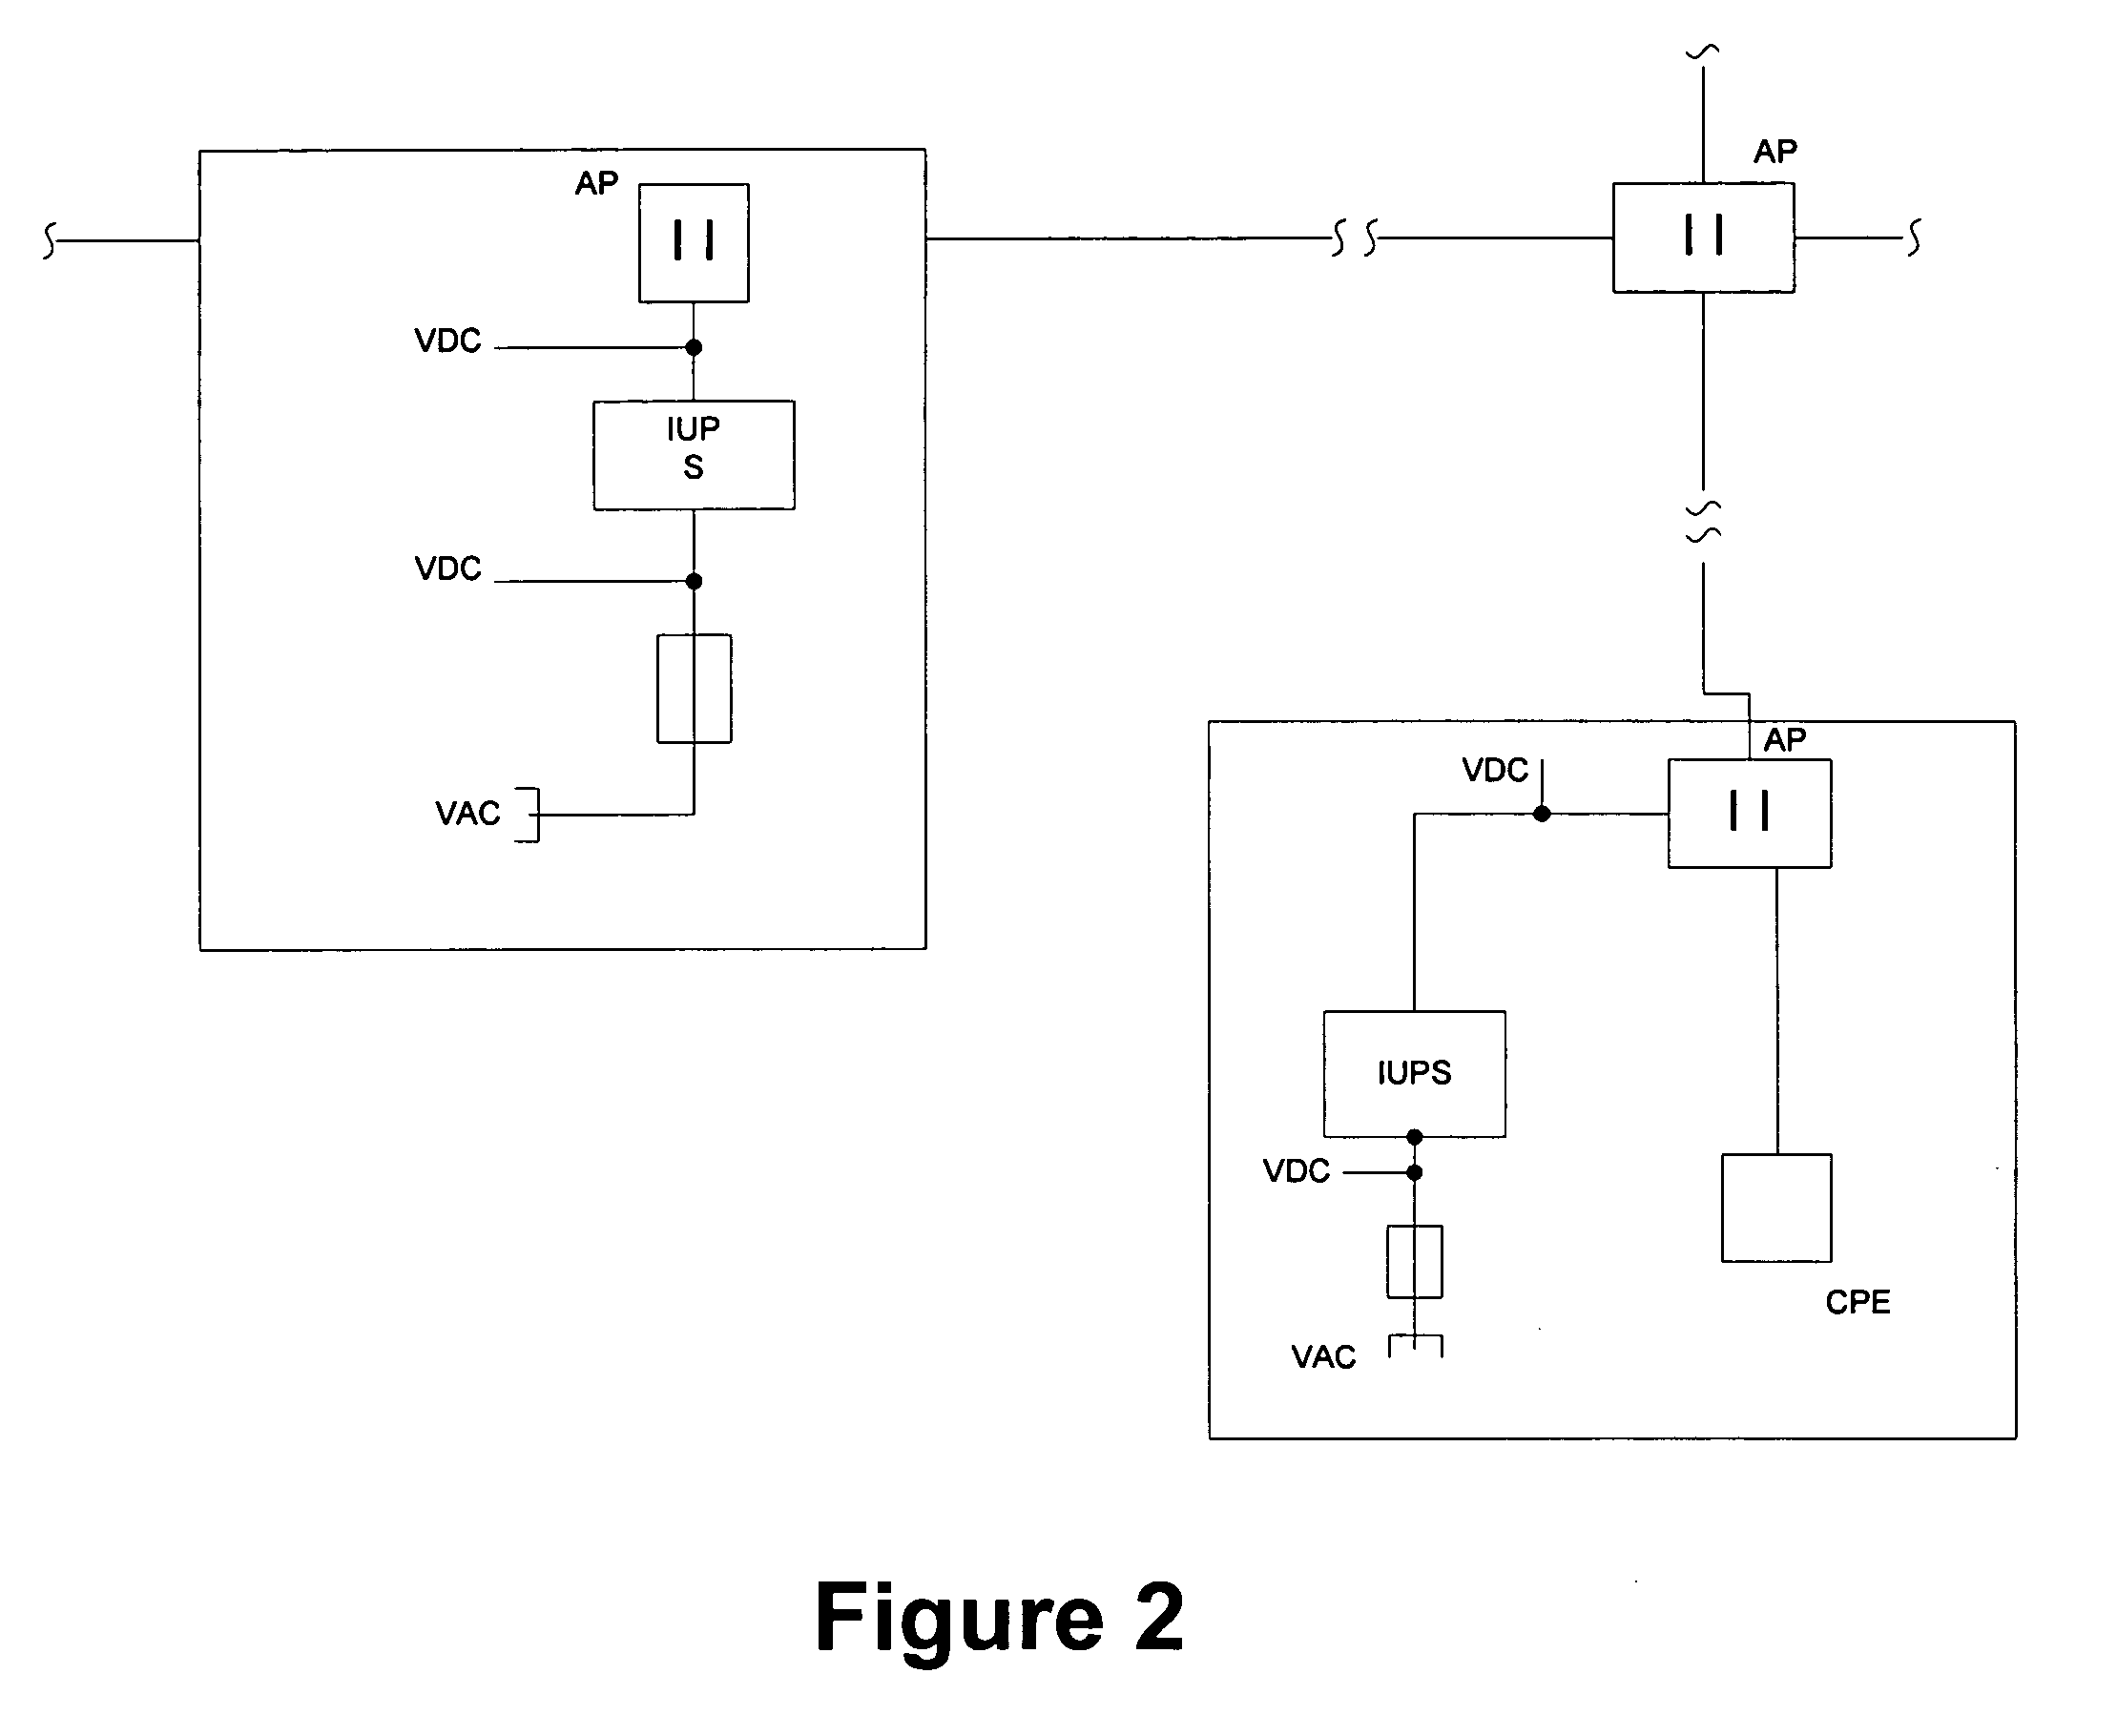 Distributed SCADA system for remote monitoring and control of access points utilizing an intelligent uninterruptible power supply system for a WISP network